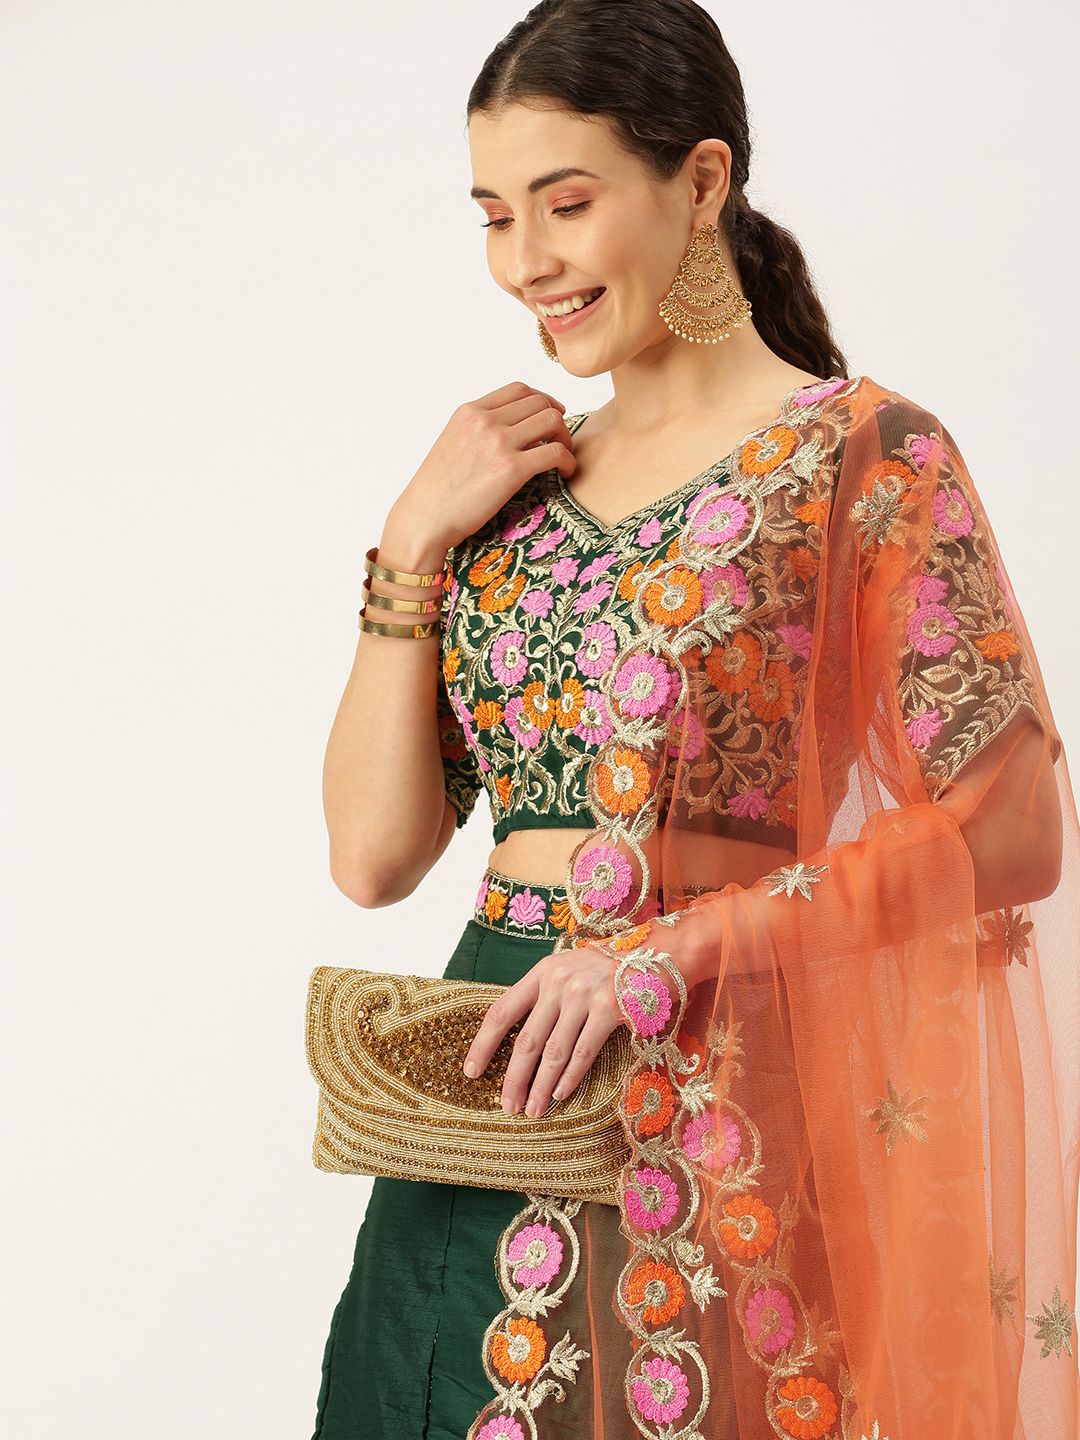 Mameraa Green & Pink Embroidered Thread Work Semi-Stitched Lehenga & Unstitched Blouse With Dupatta Price in India